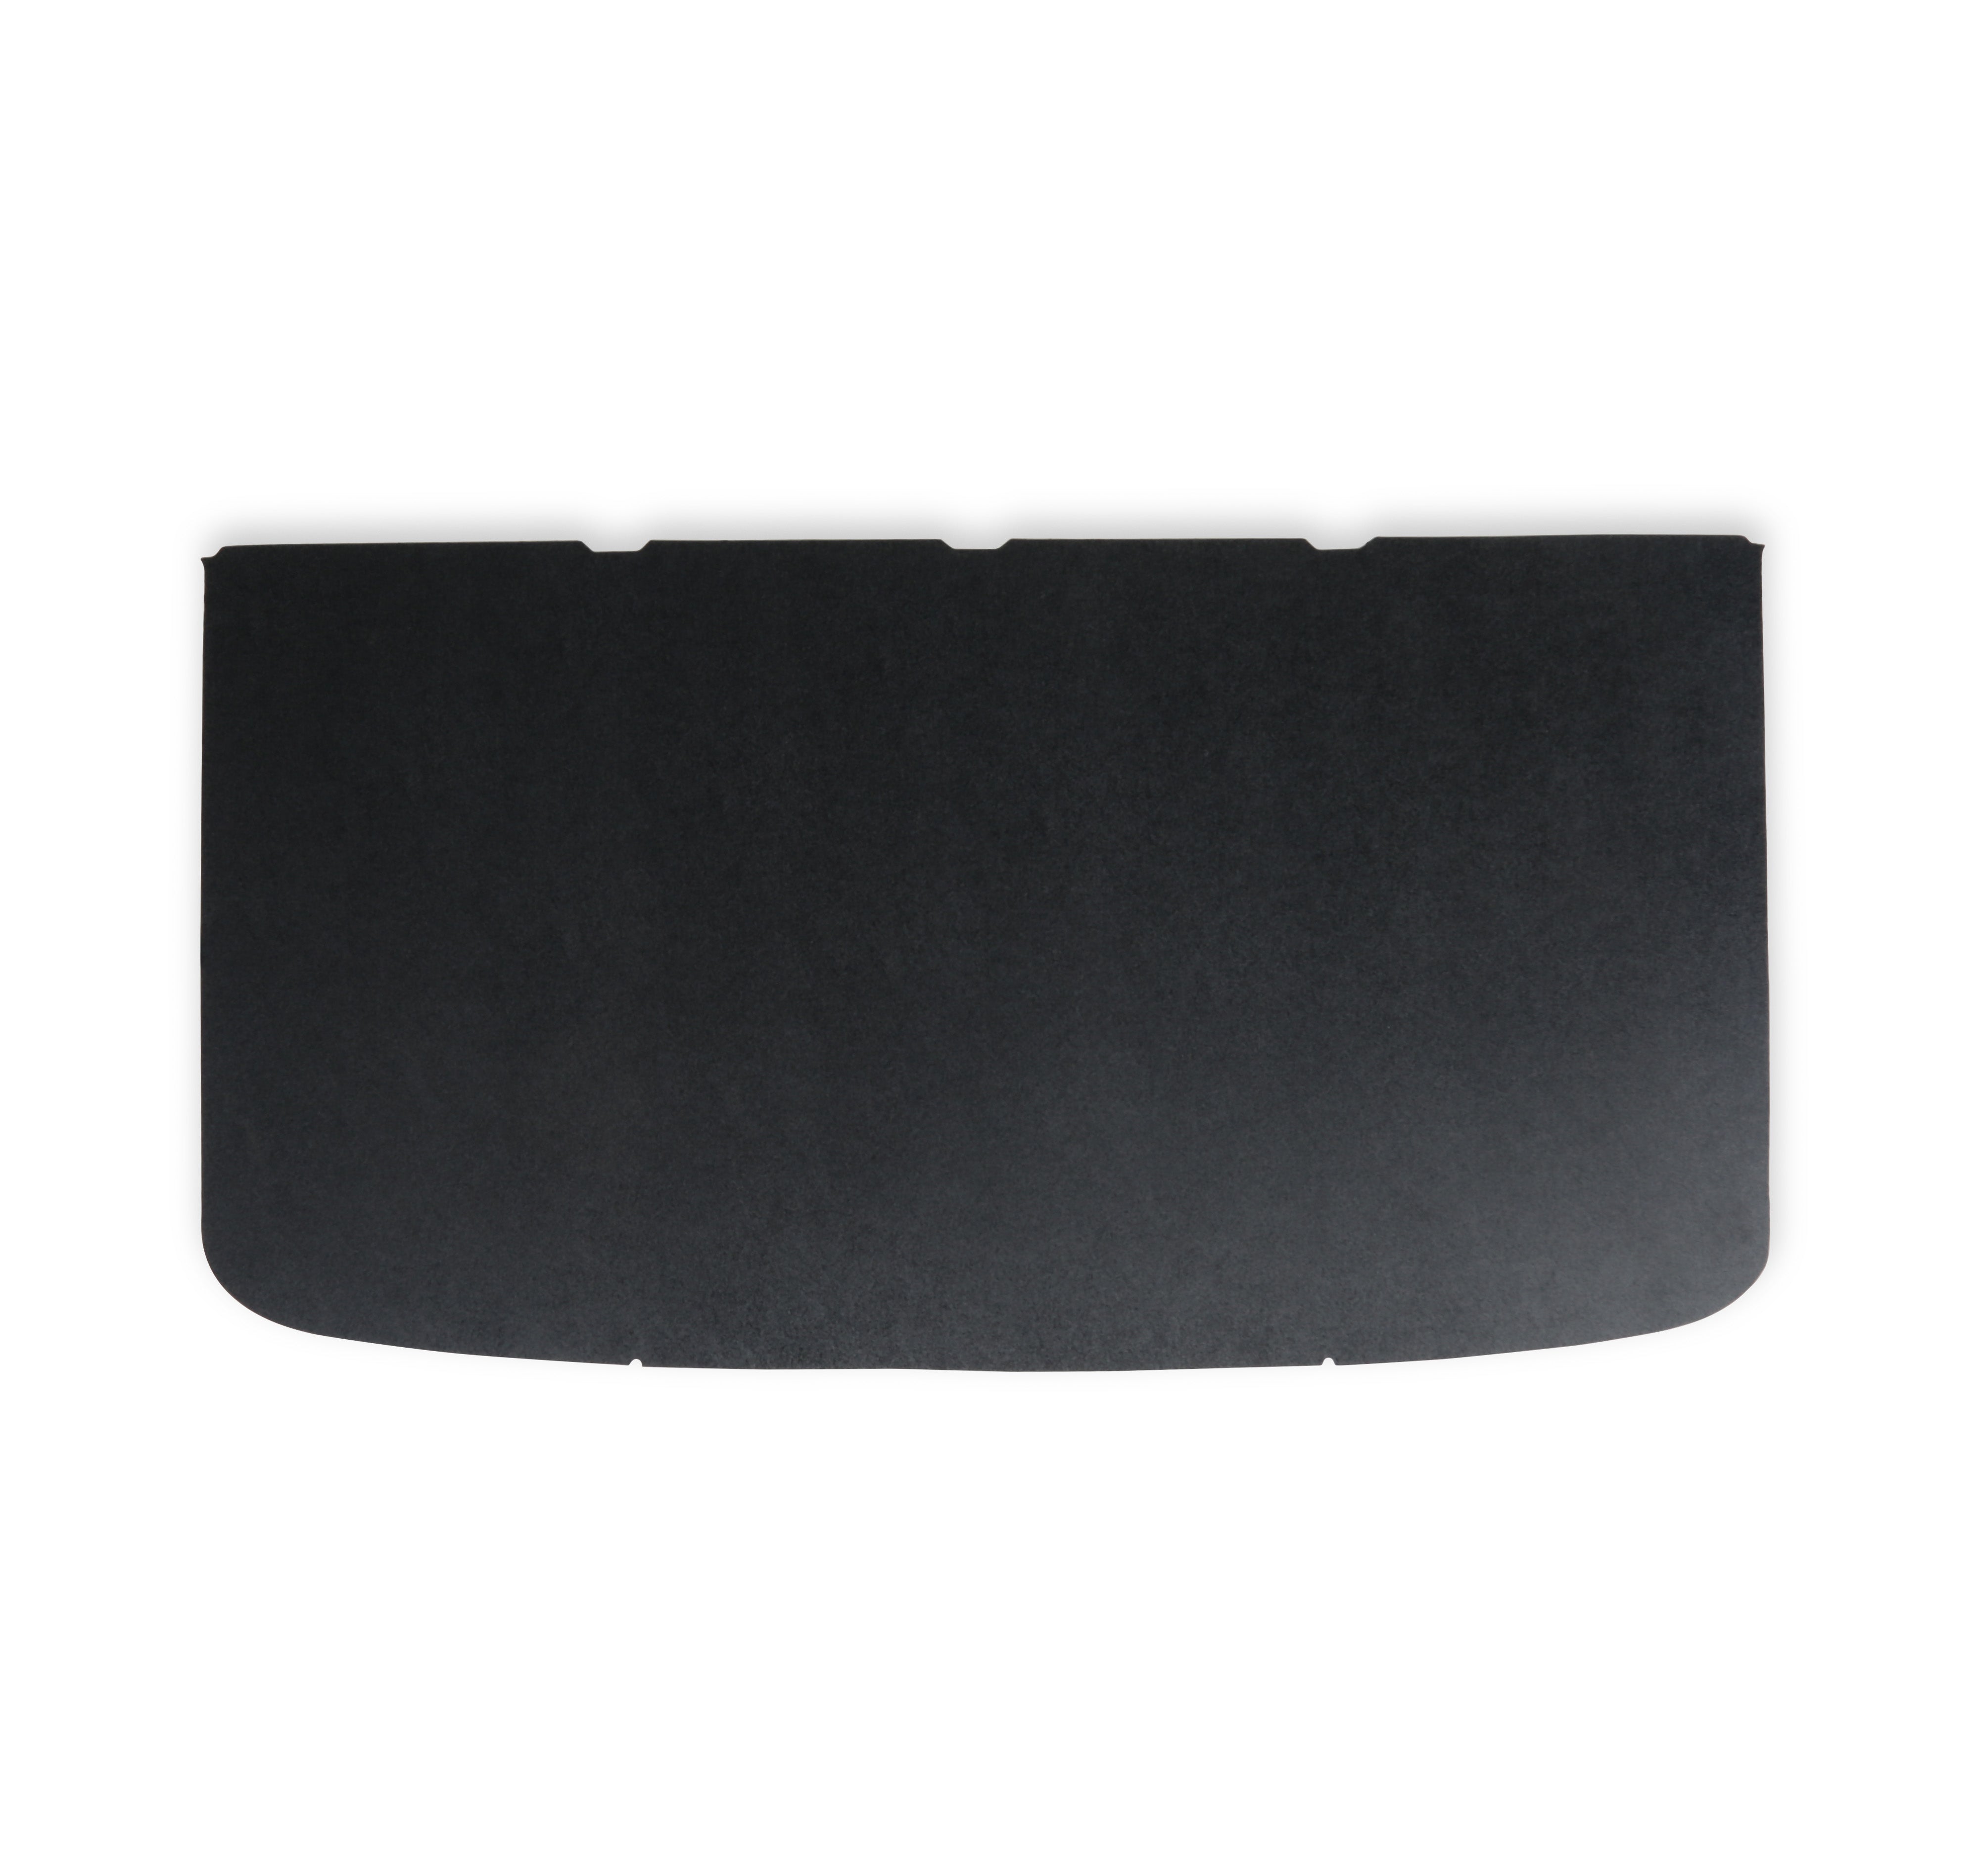 BROTHERS F-Series ABS Headliner - Uncovered pn 05-354